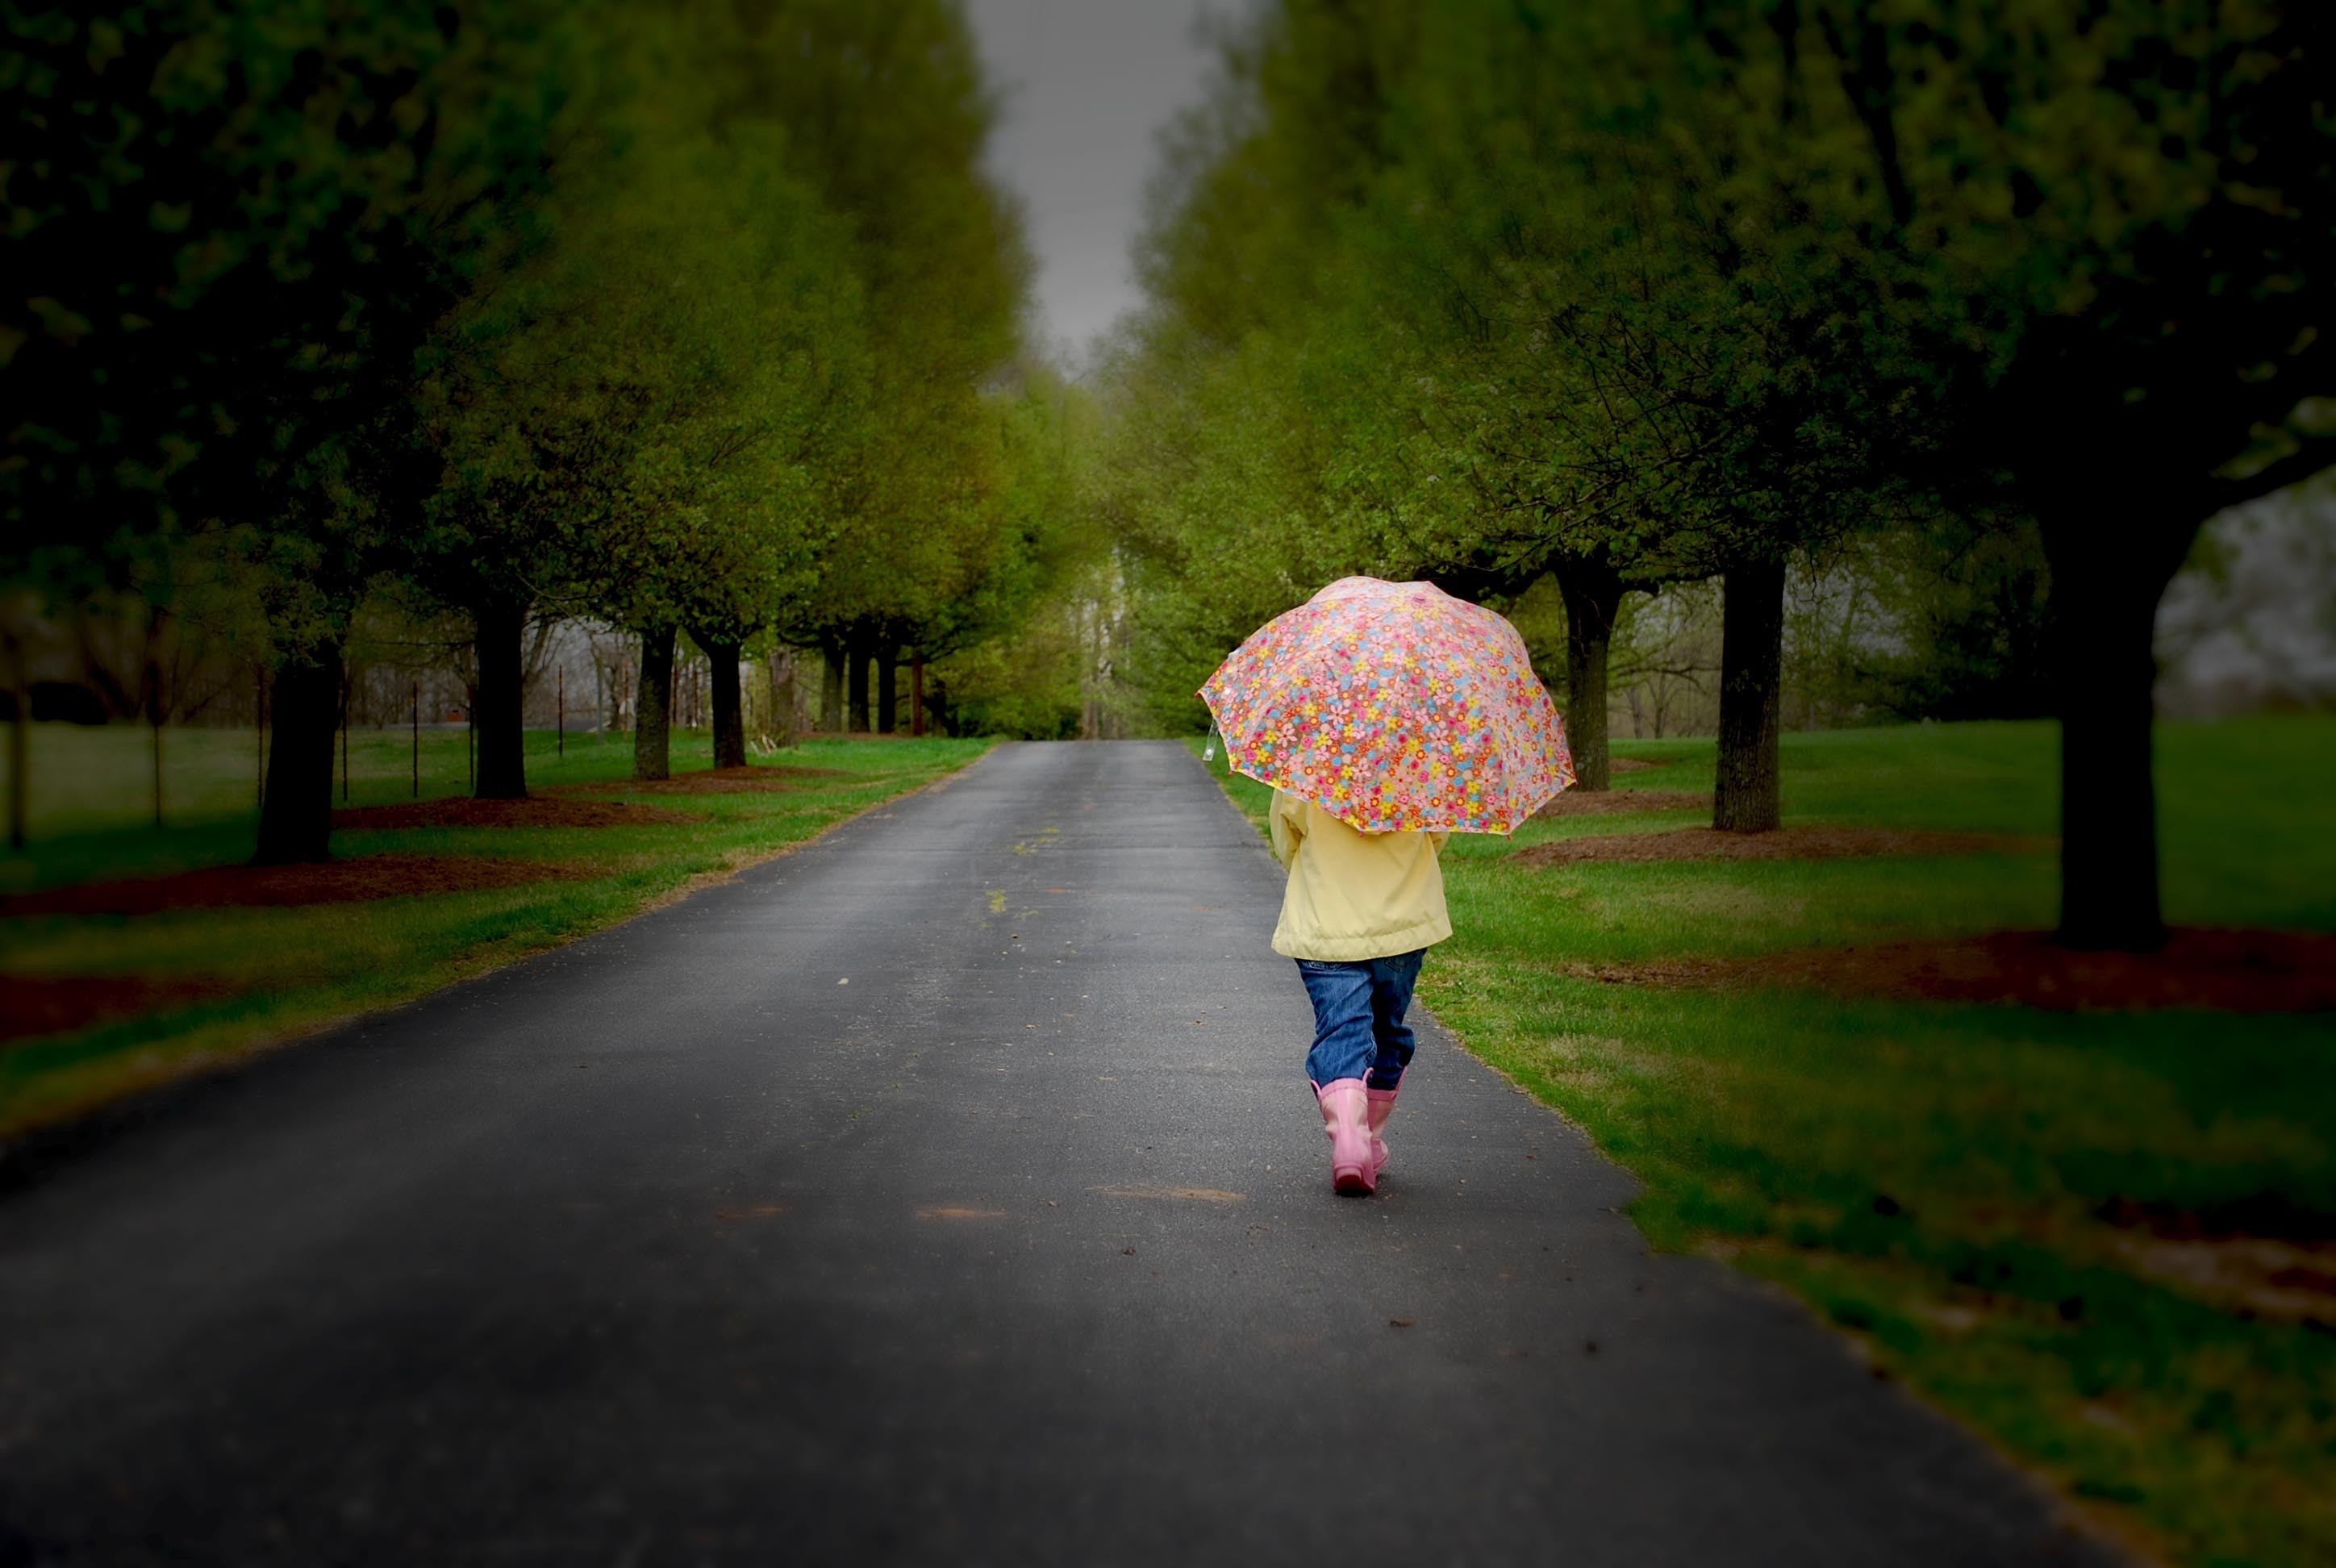 park, wood, miscellanea, miscellaneous, road, tree, stroll, overcast, mainly cloudy, umbrella QHD